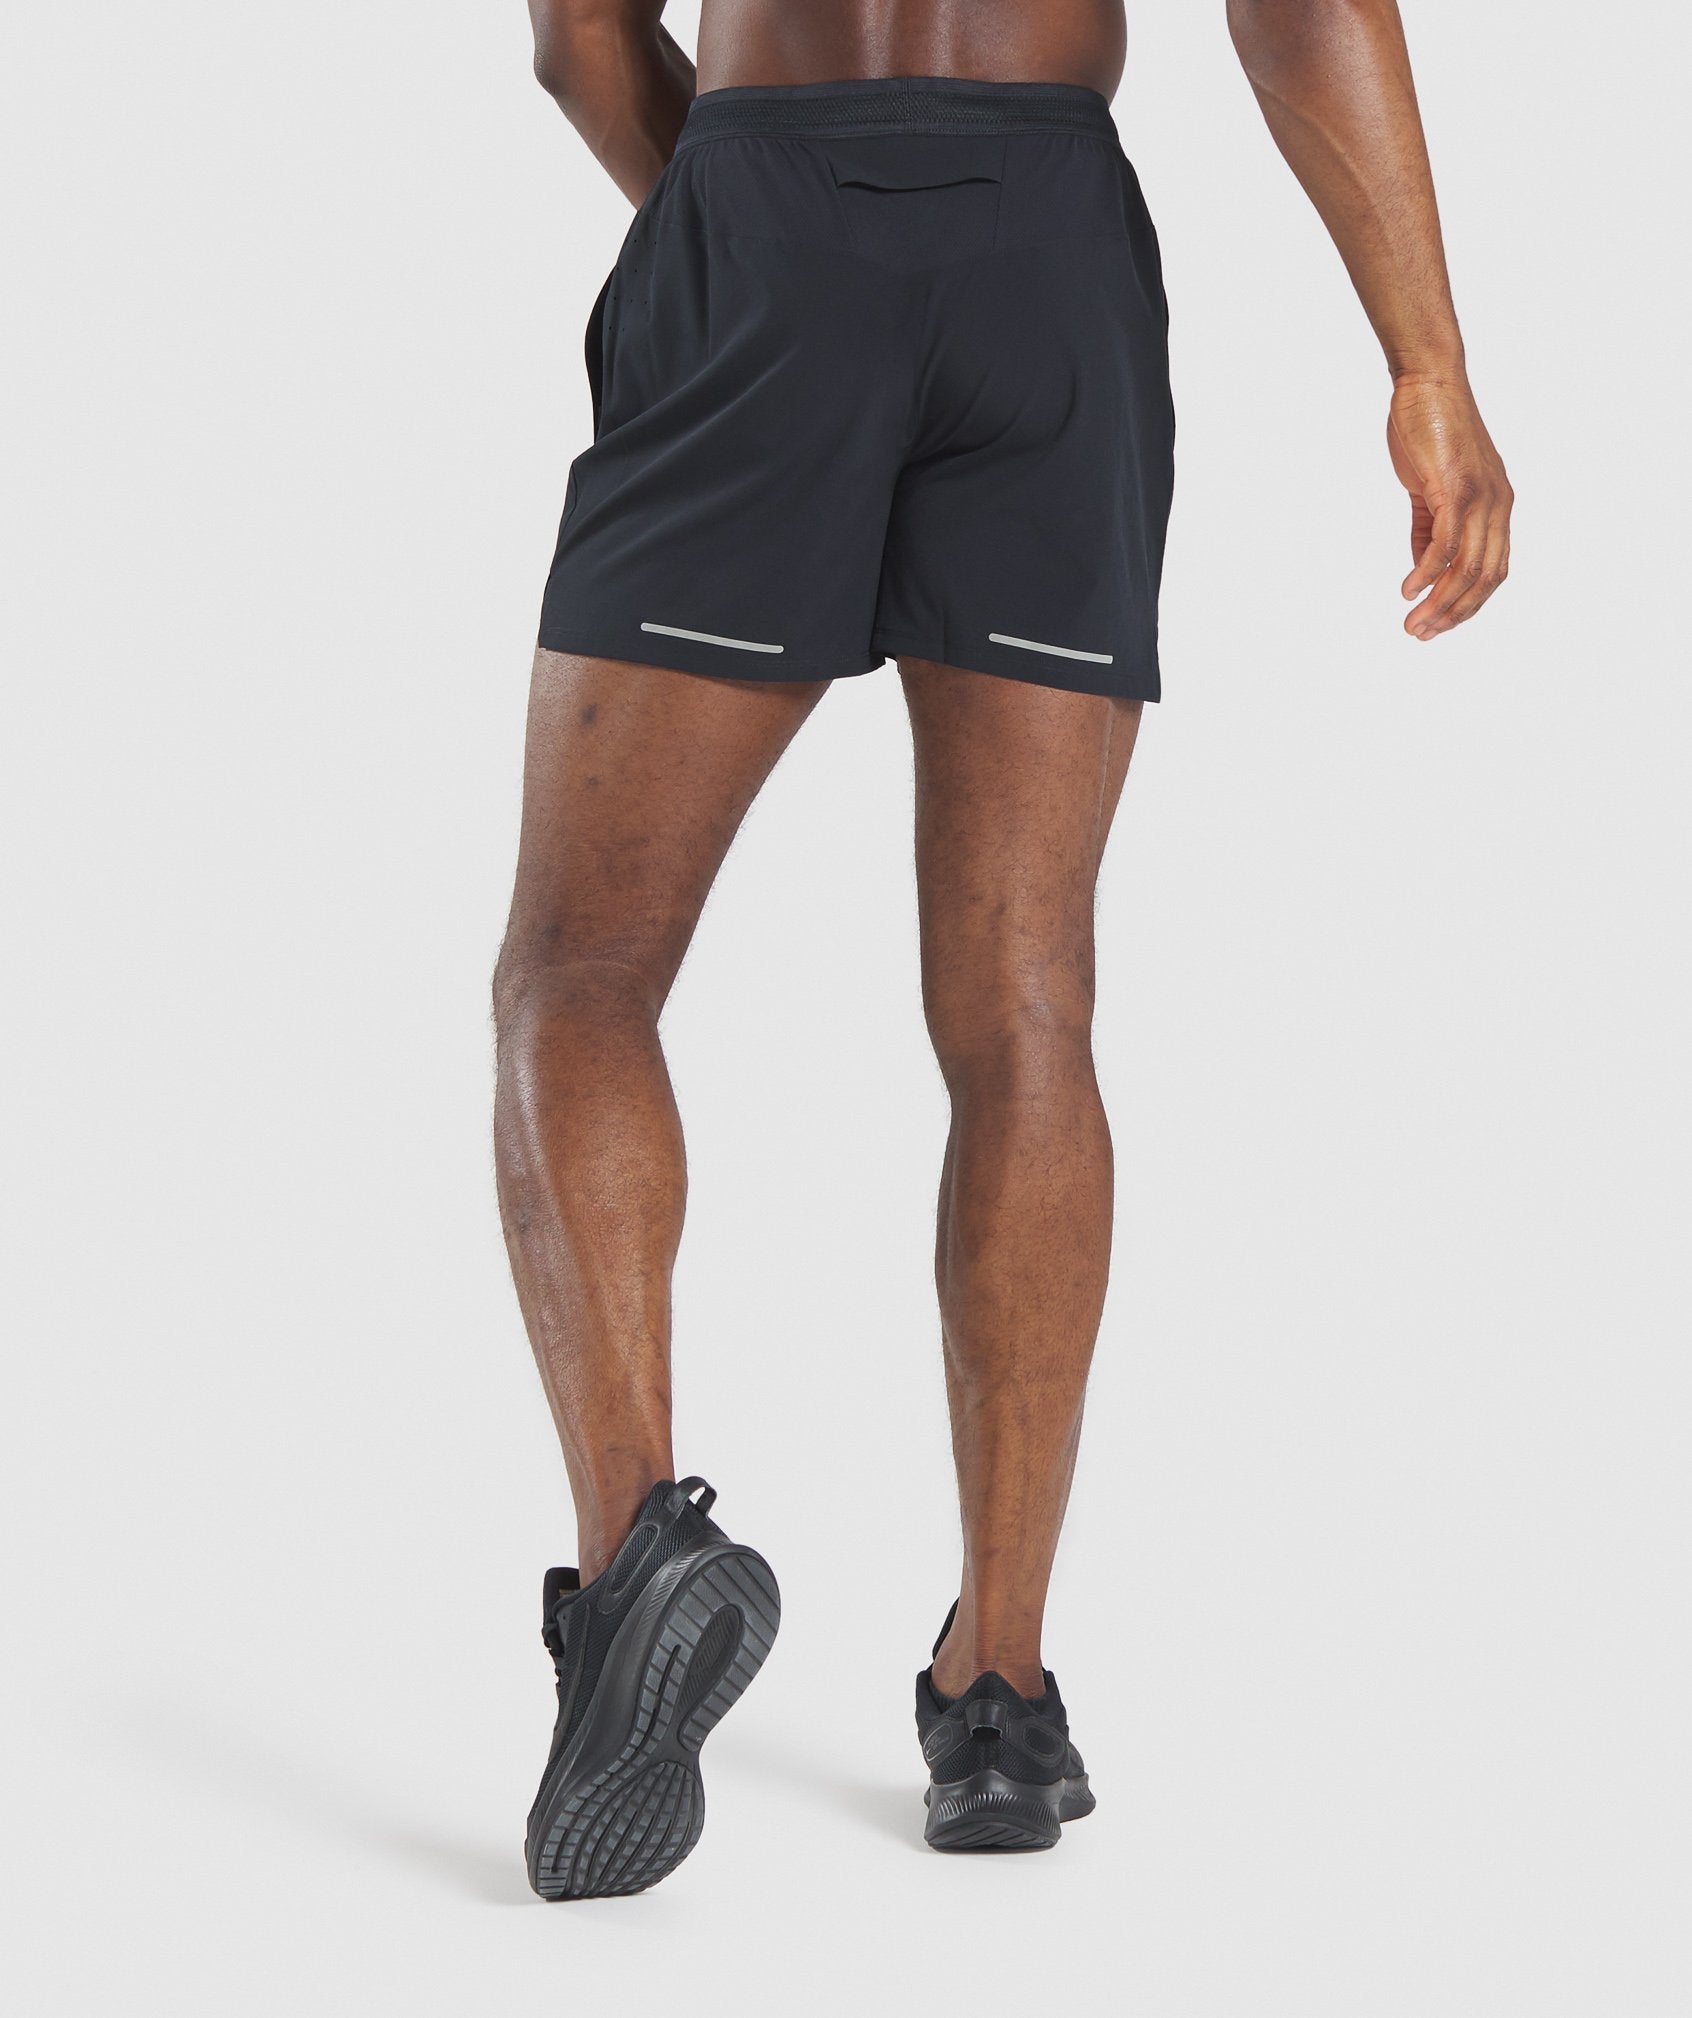 Speed 5" Shorts in Black - view 3